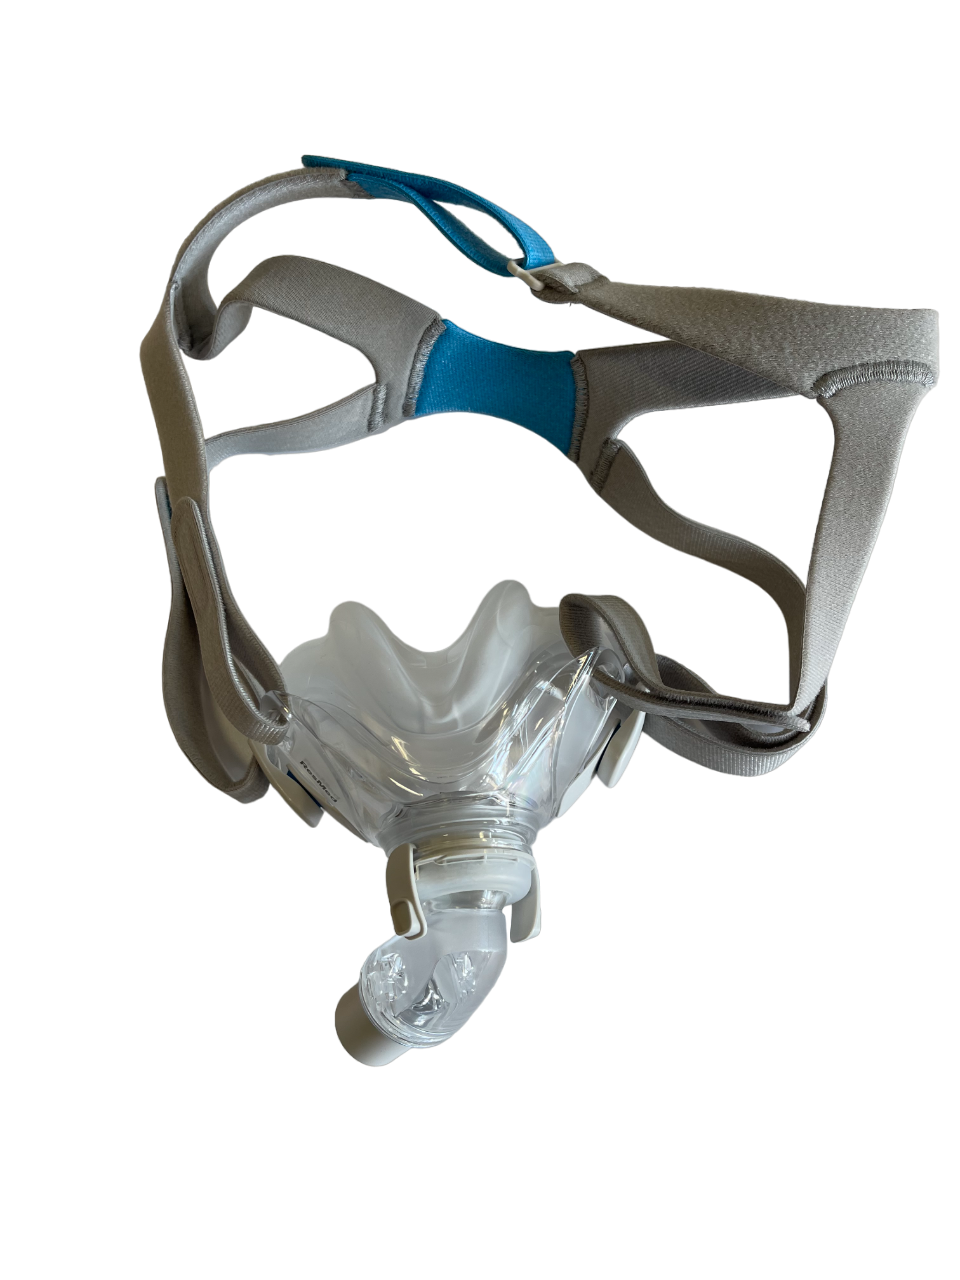 ResMed AirFit F30 Full Face CPAP Mask with Headgear - No Insurance Medical Supplies